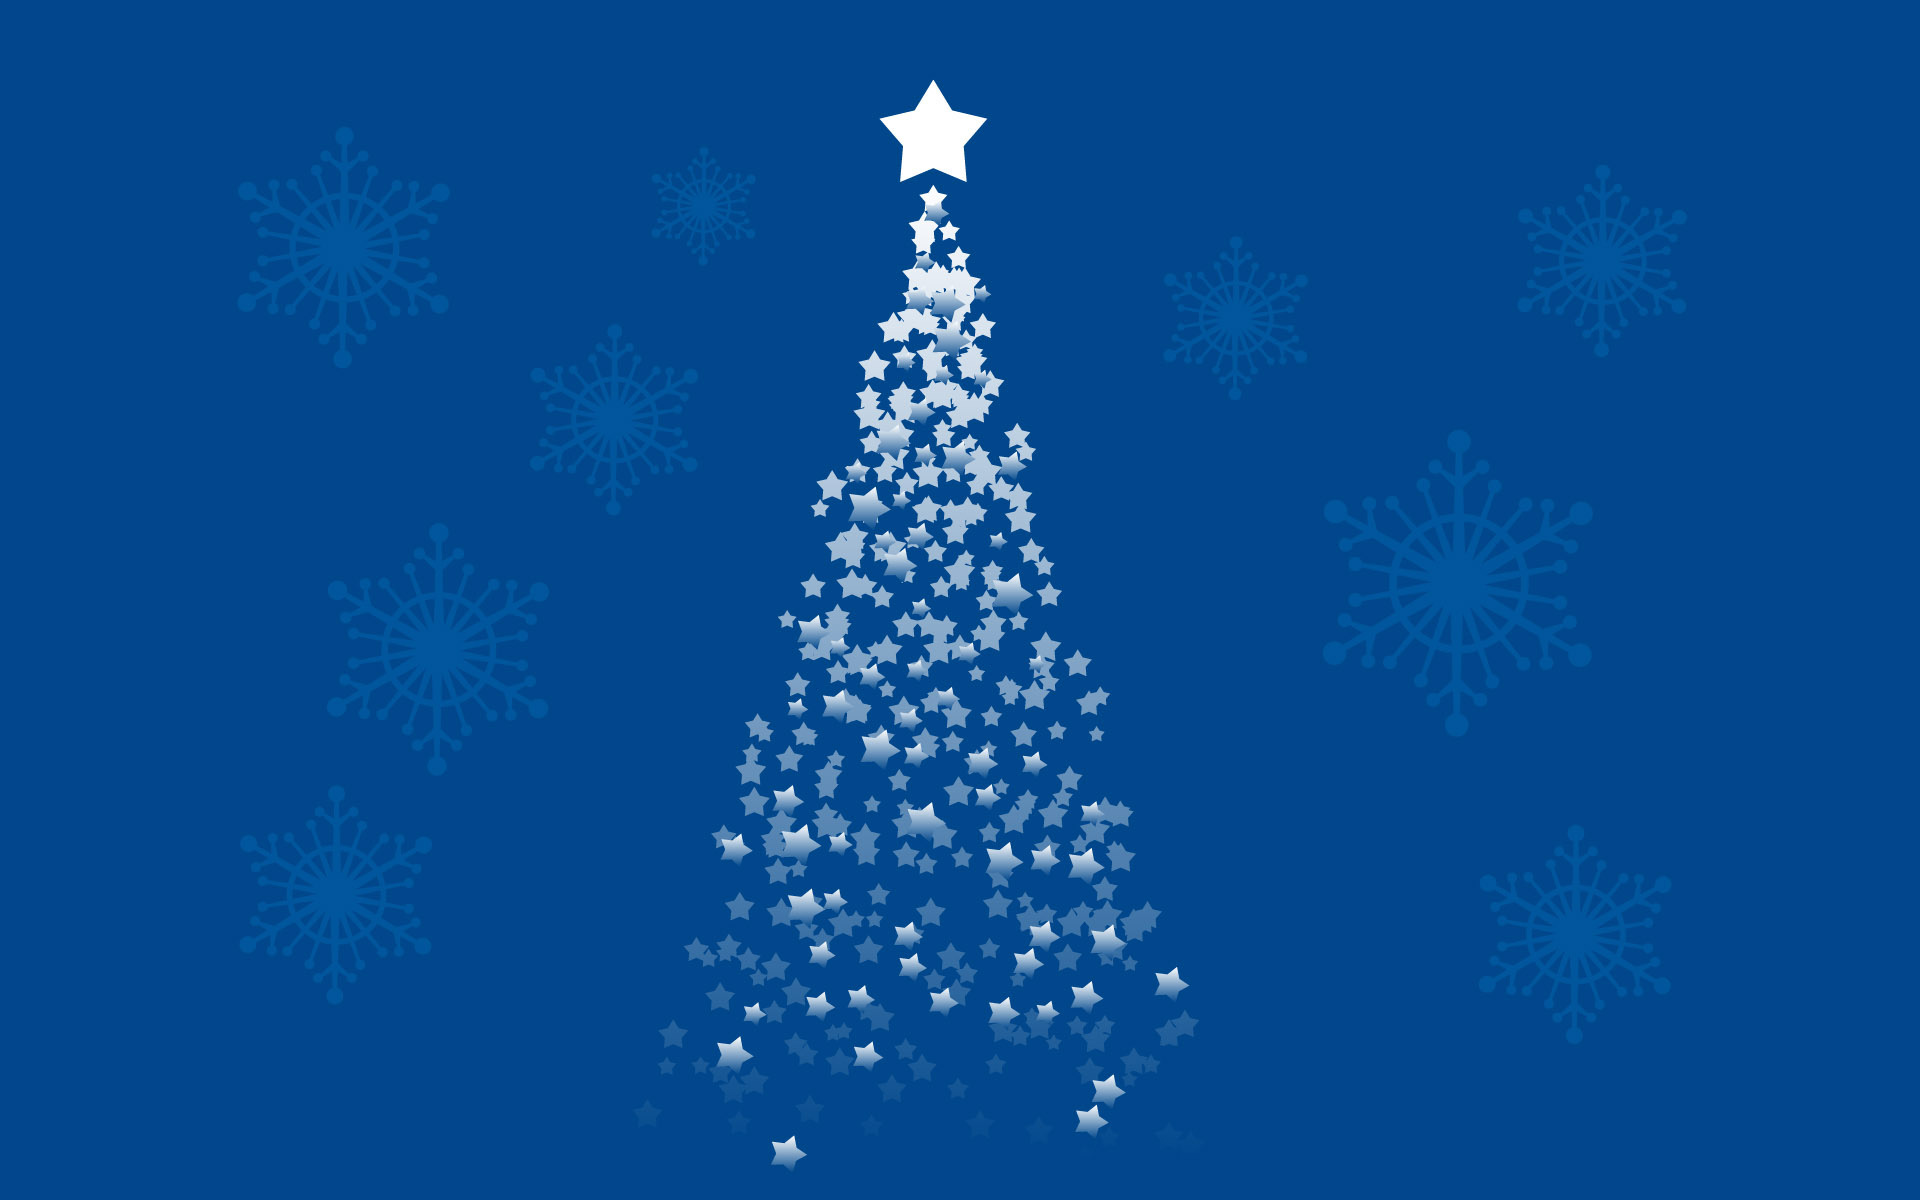 Image: New year, Christmas tree, stars, snowflakes, blue background